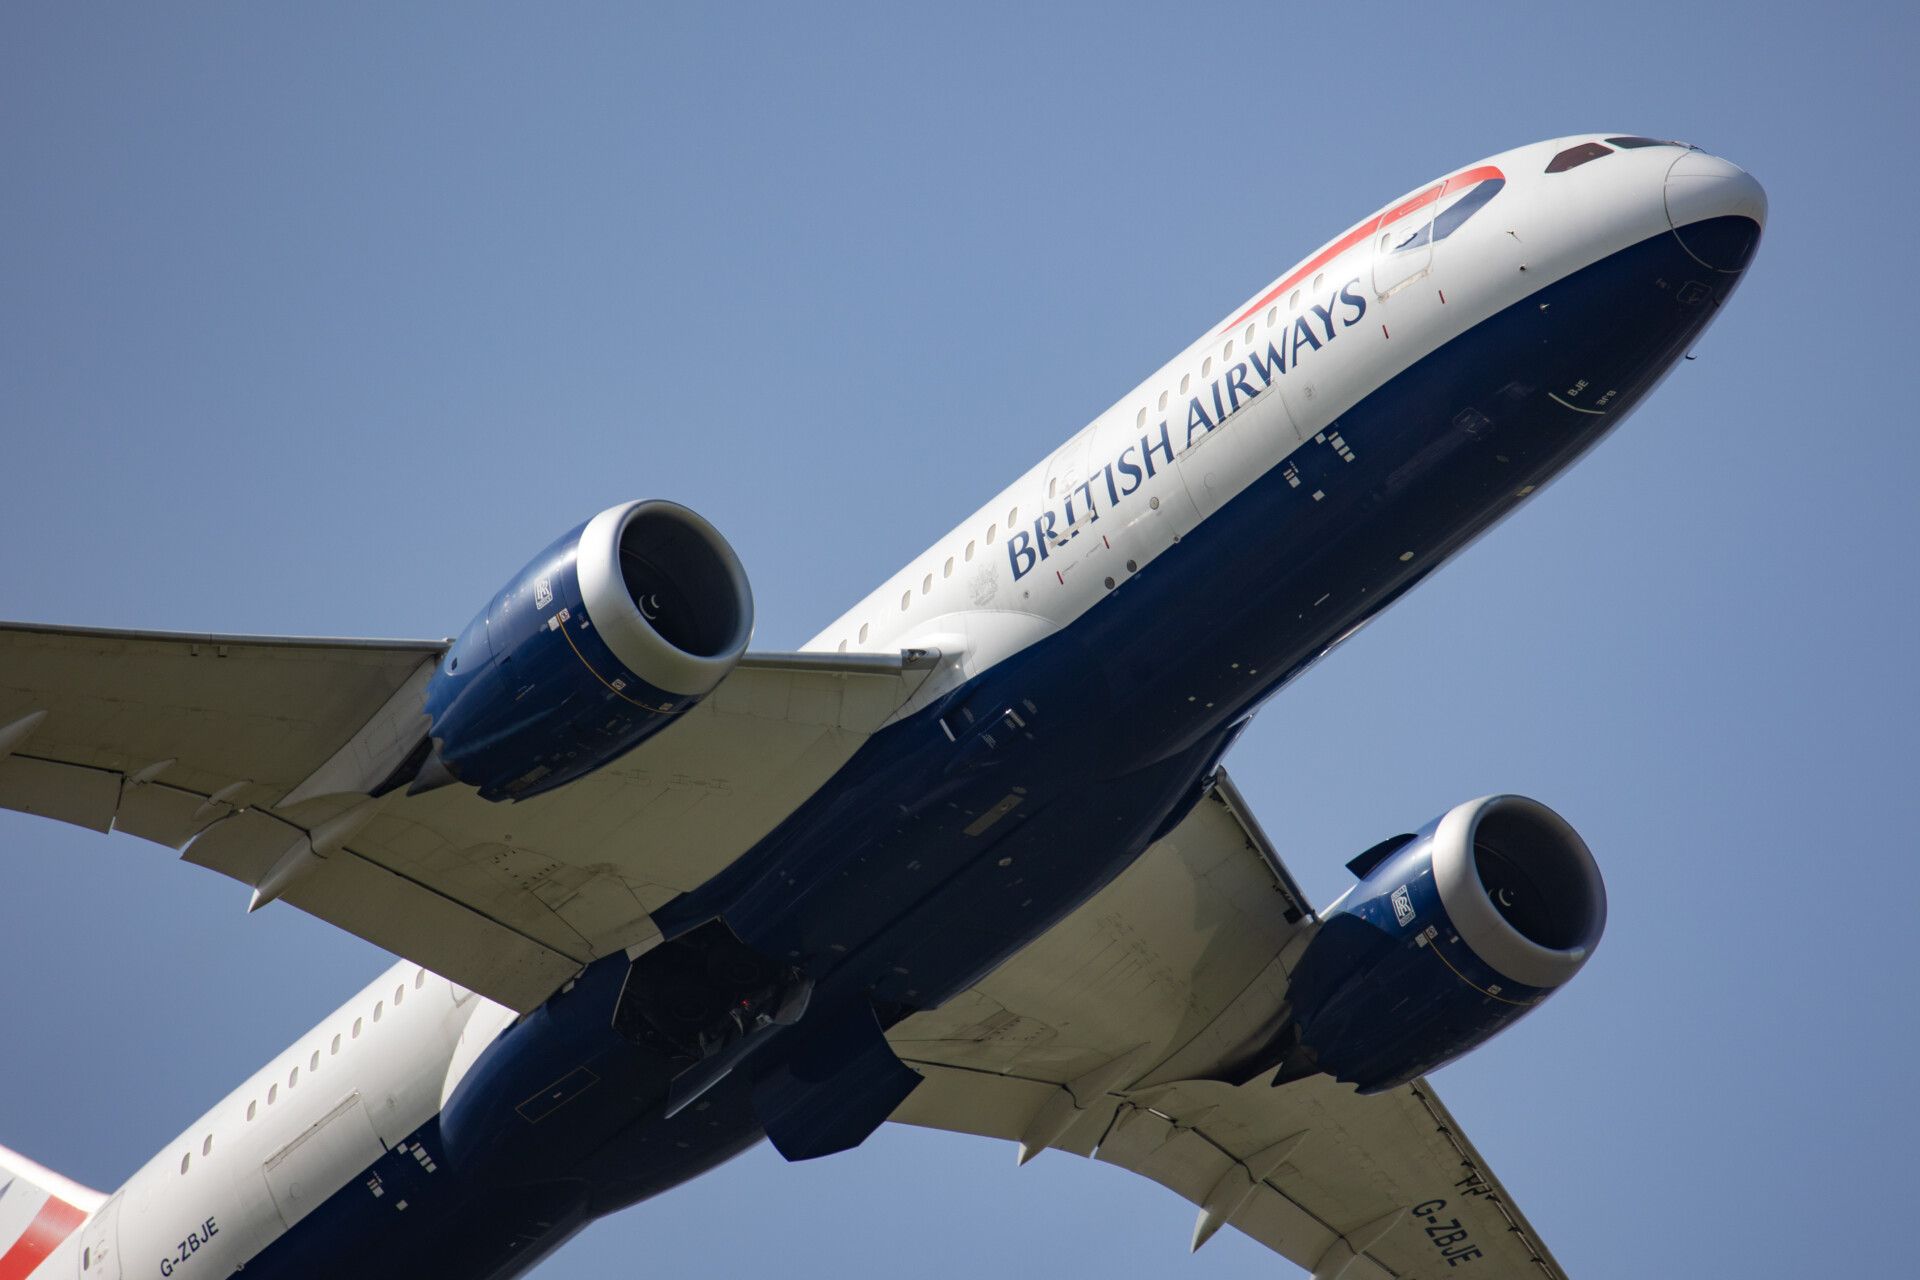 British Airways to double flights from SAN to London Heathrow next April